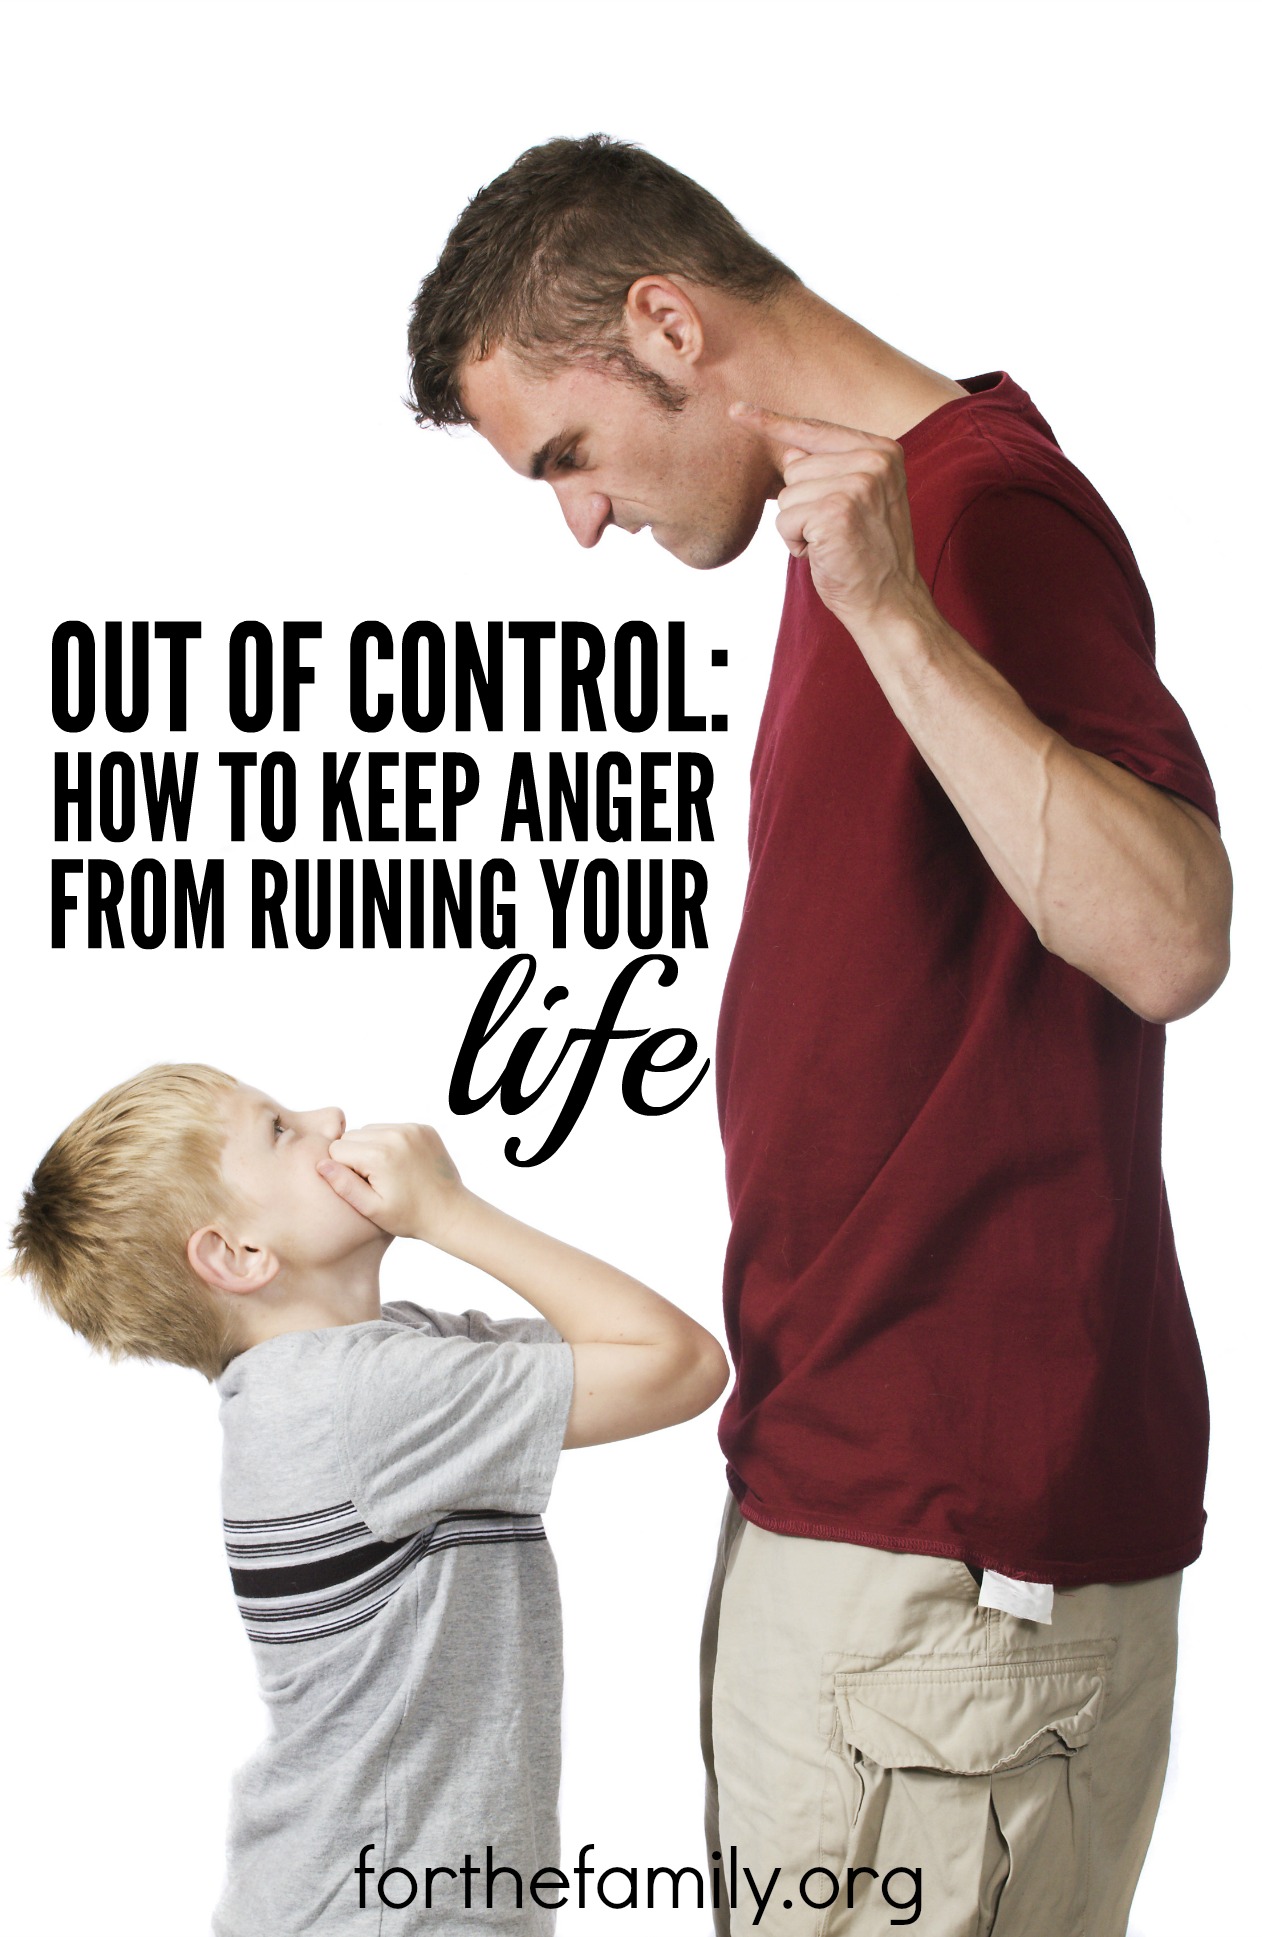 Out of Control:  How to Keep Anger from Ruining Your Life